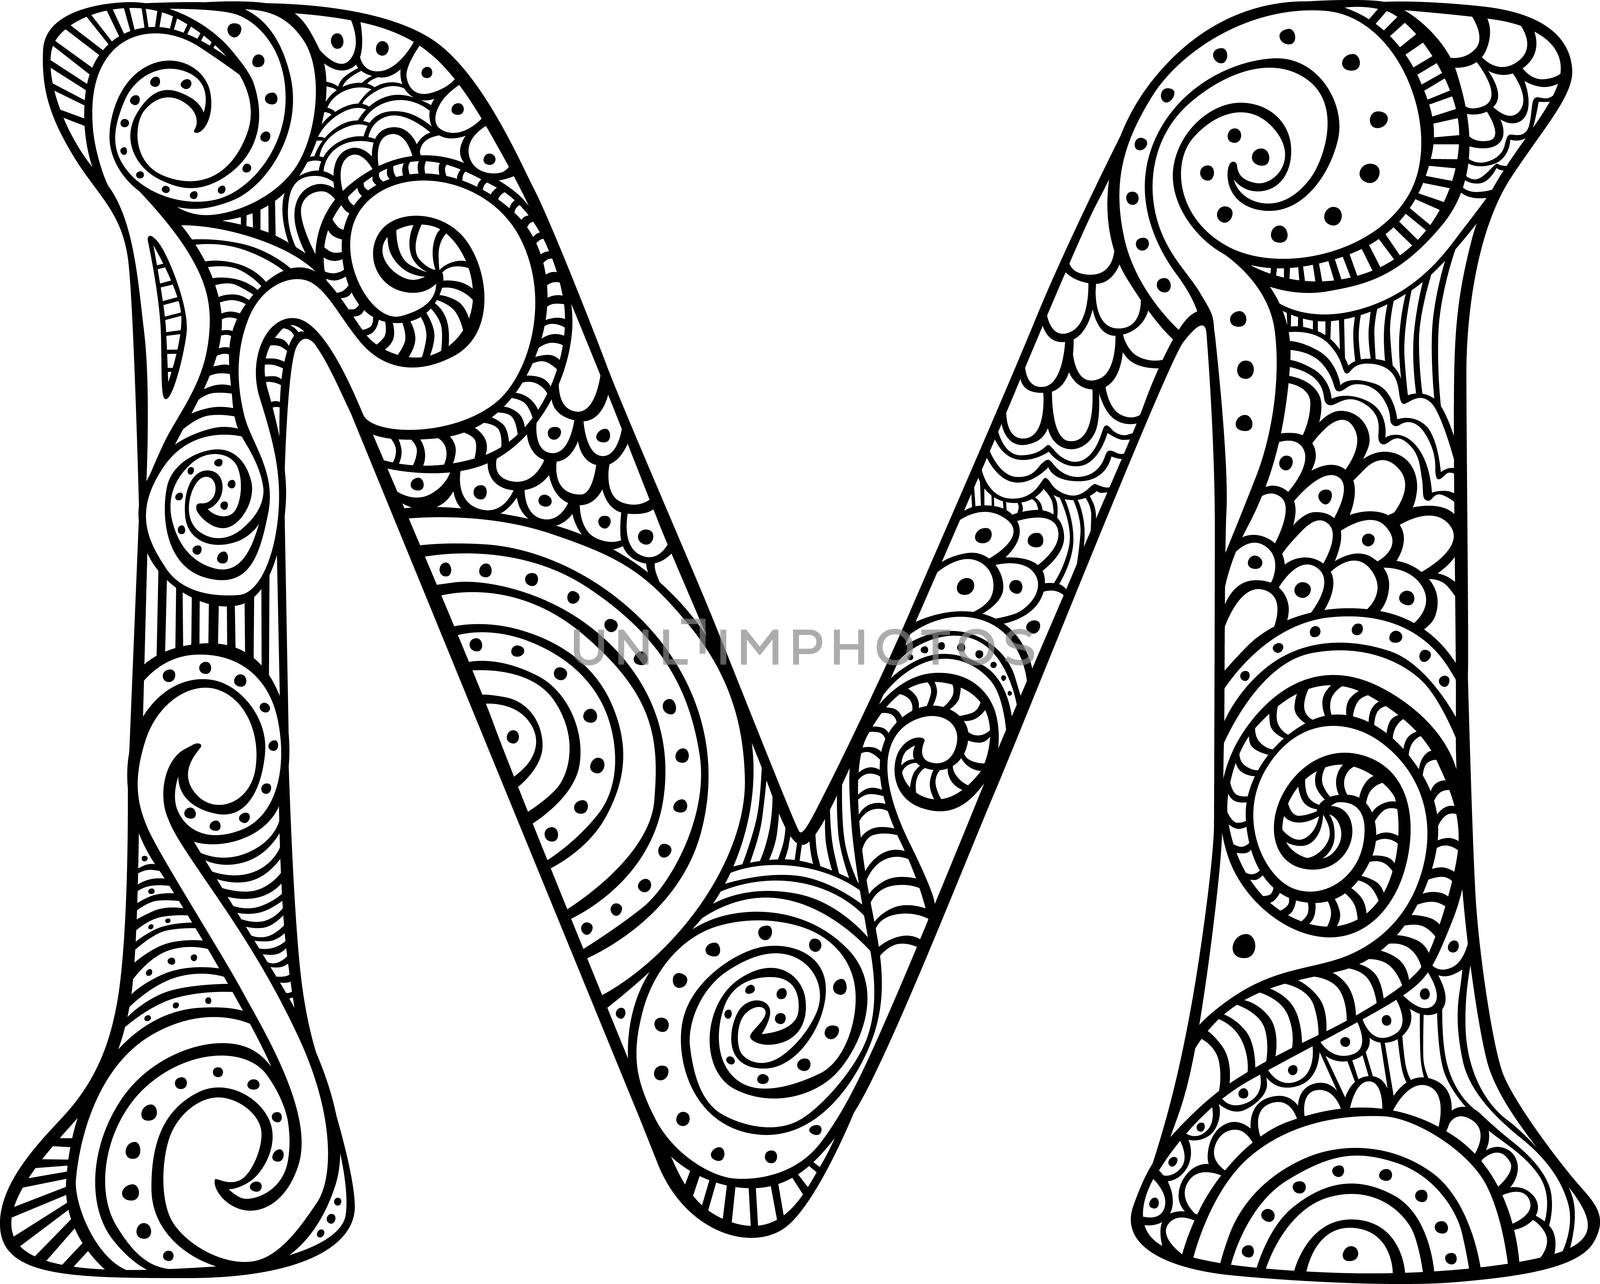 Illustrated letter M by nahhan